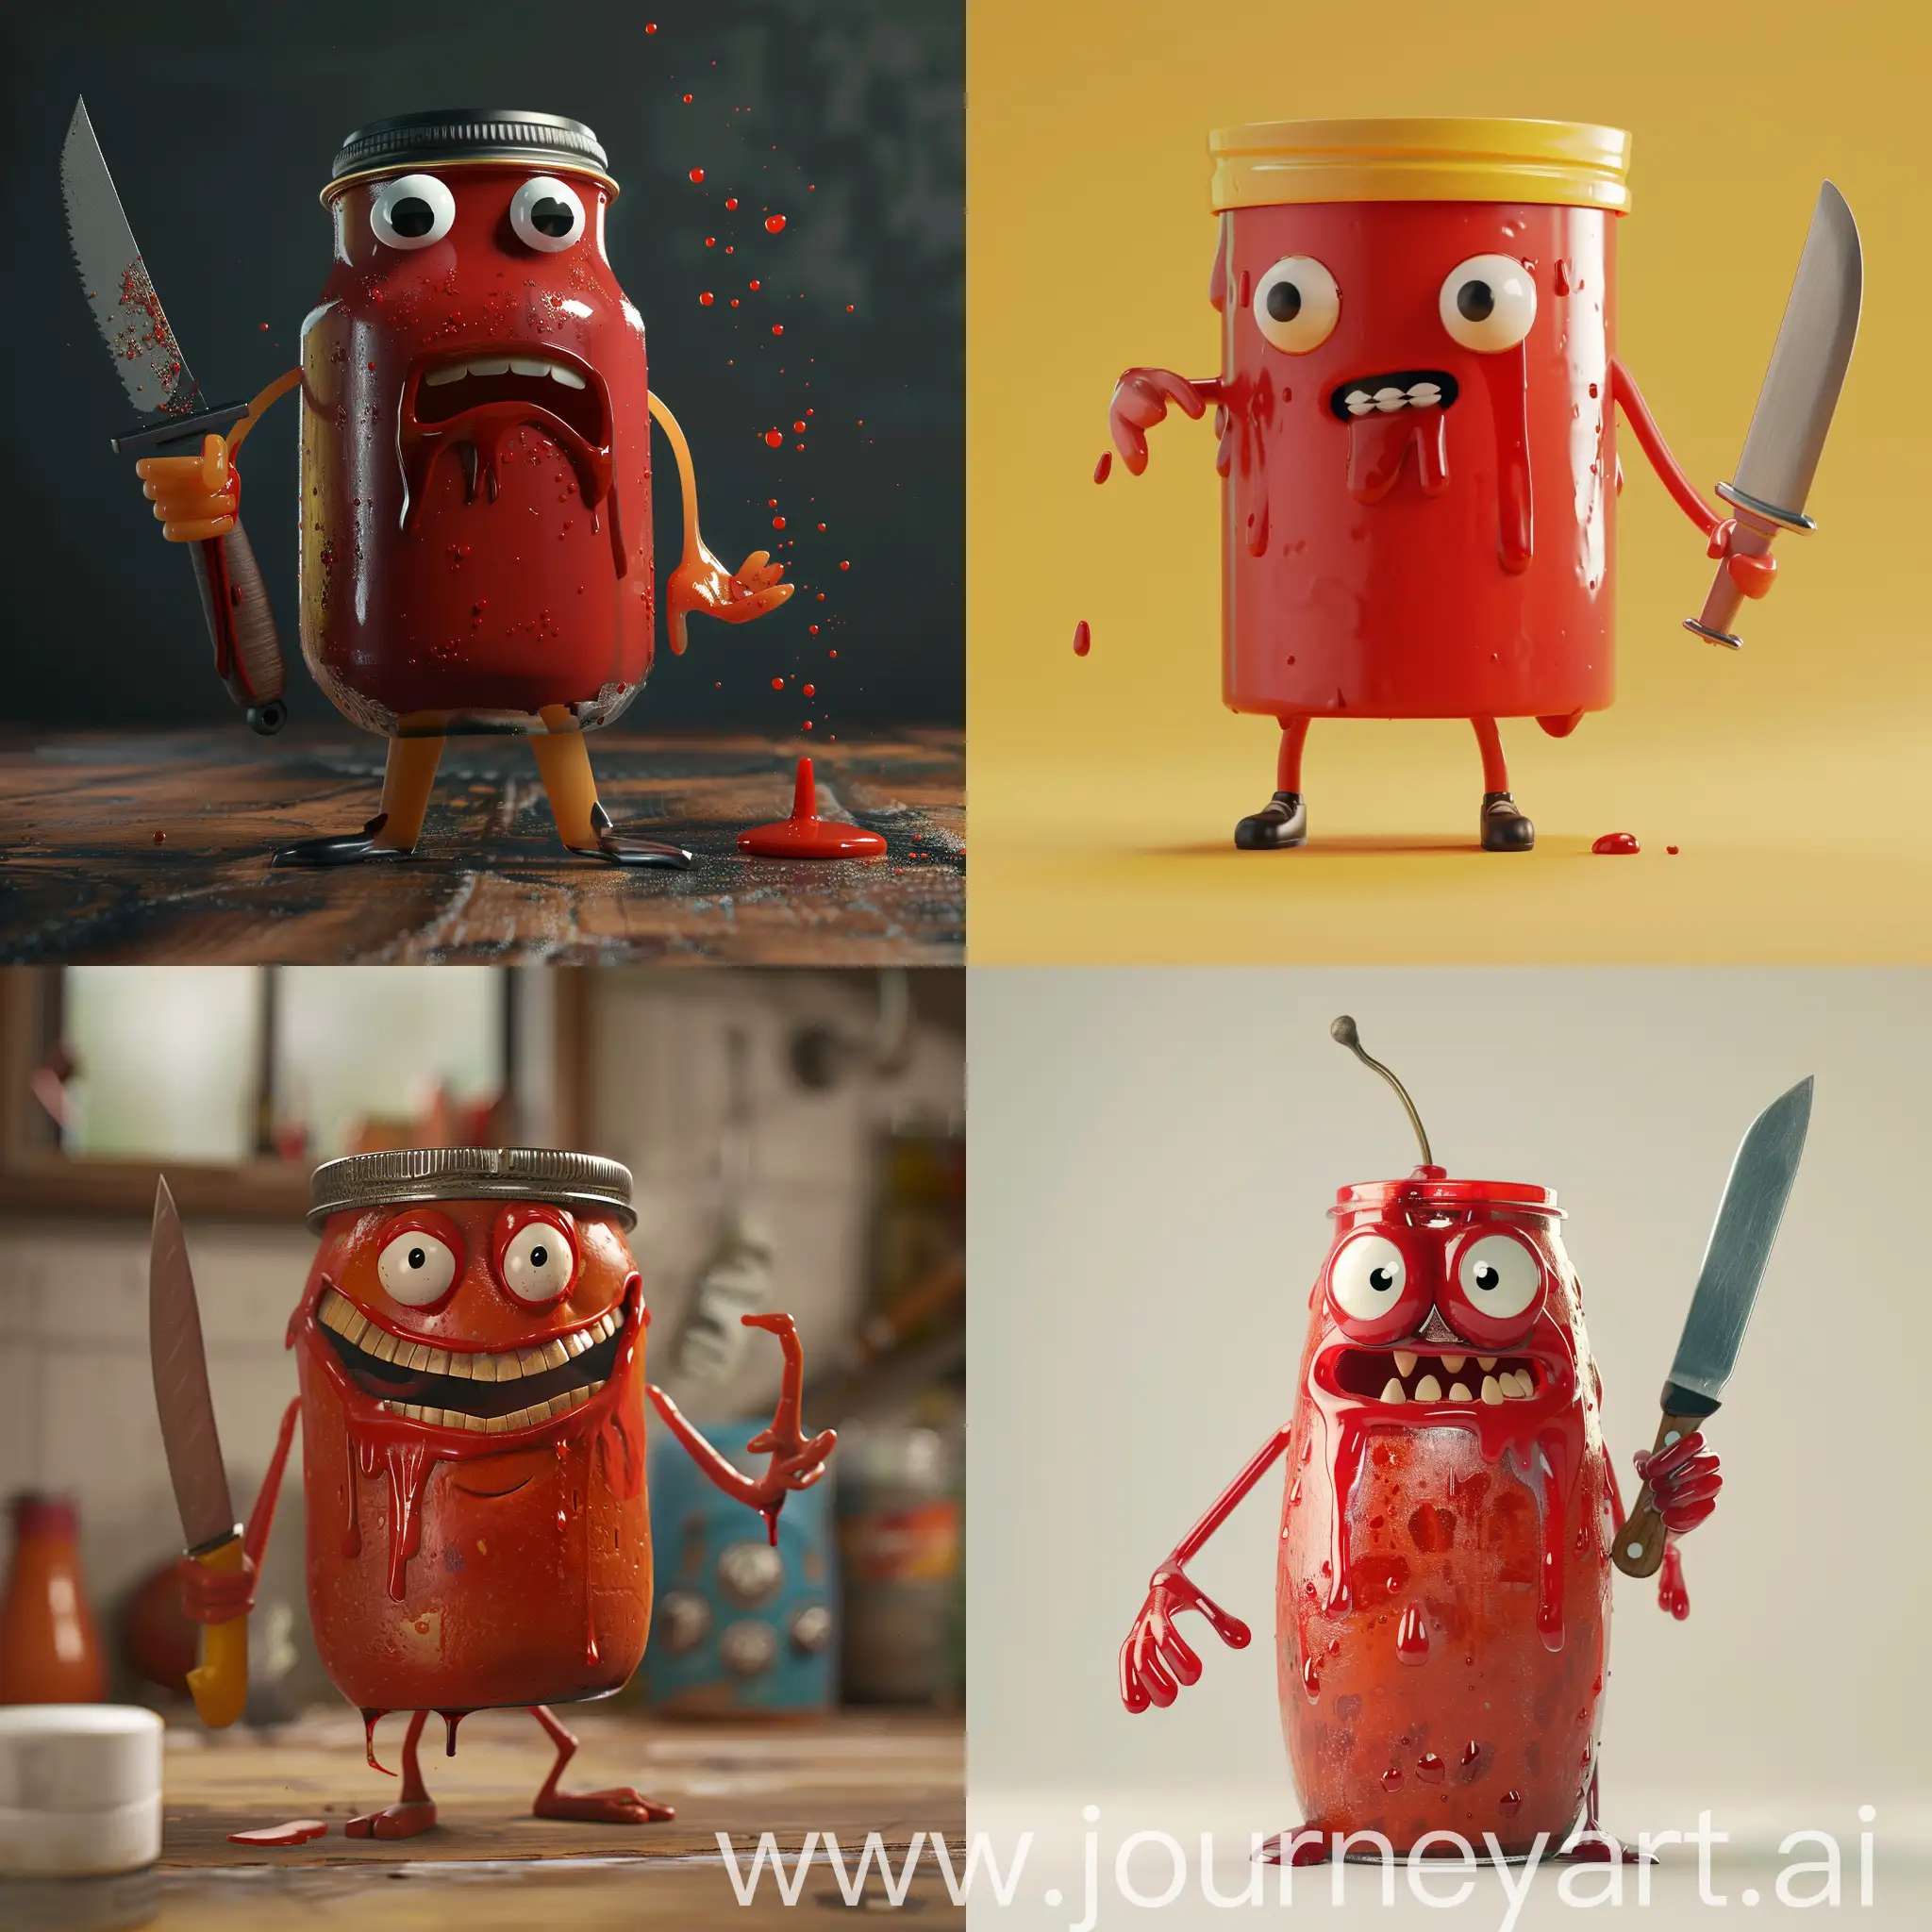 A talking jar of ketchup with arms and legs holding a knife :: 3D animation 